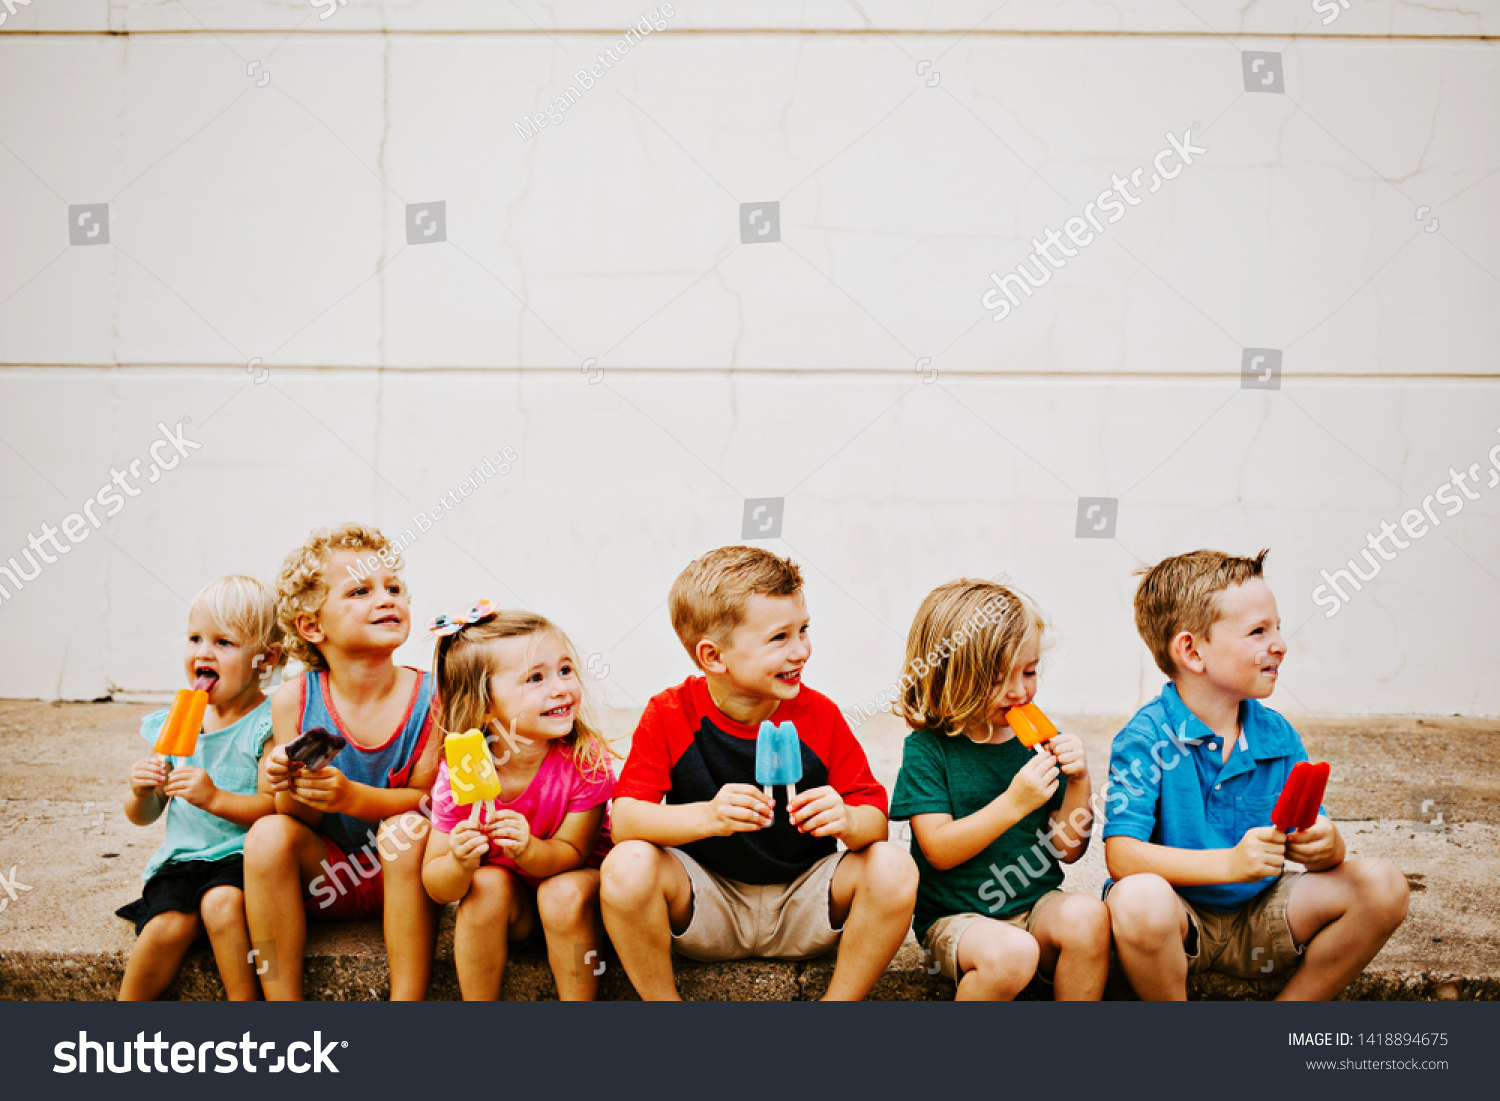 Group of Kids Eating Colorful Frozen Popsicles in the Summer #1418894675